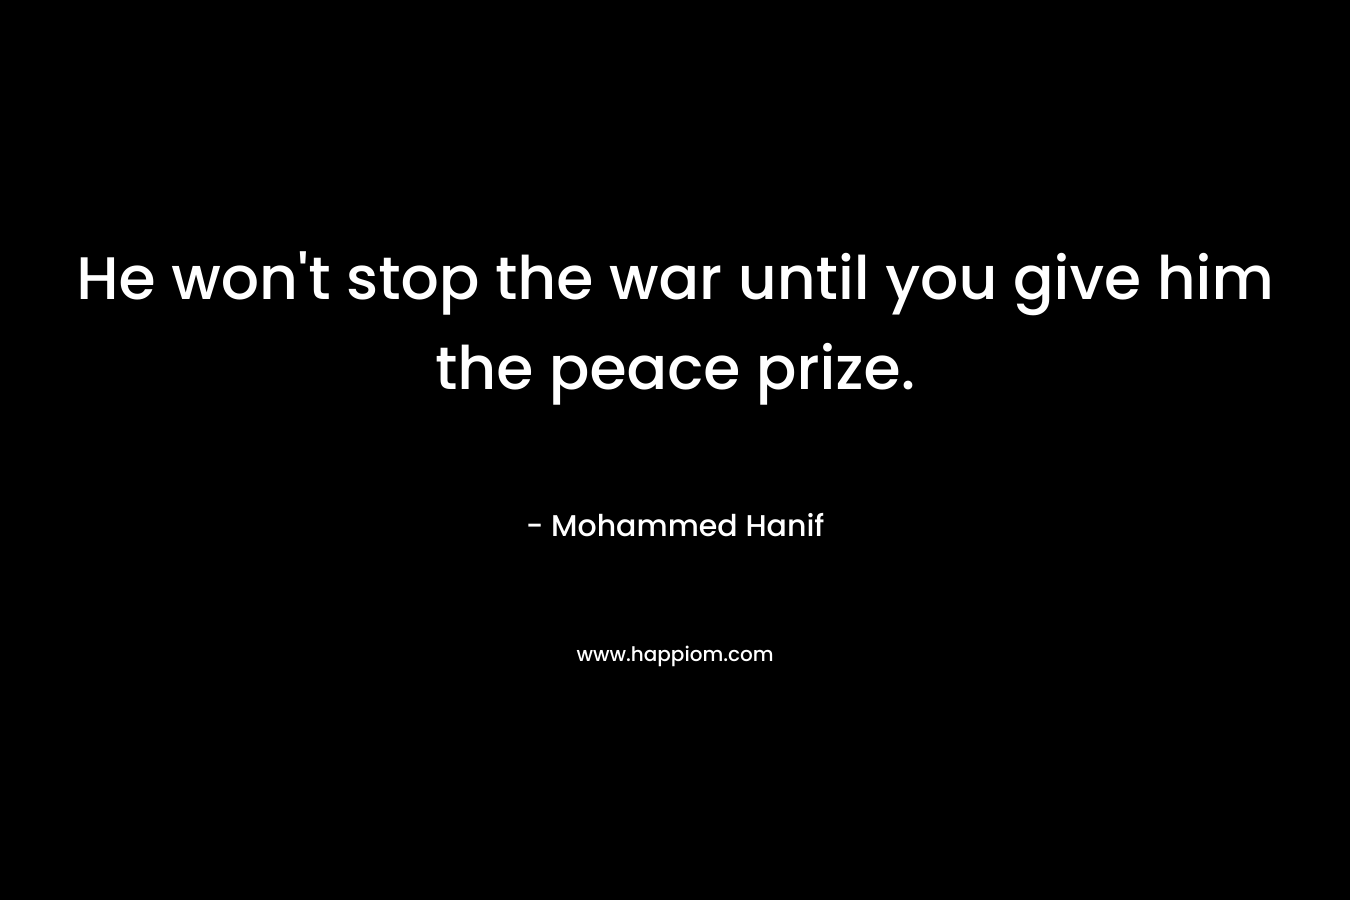 He won't stop the war until you give him the peace prize.